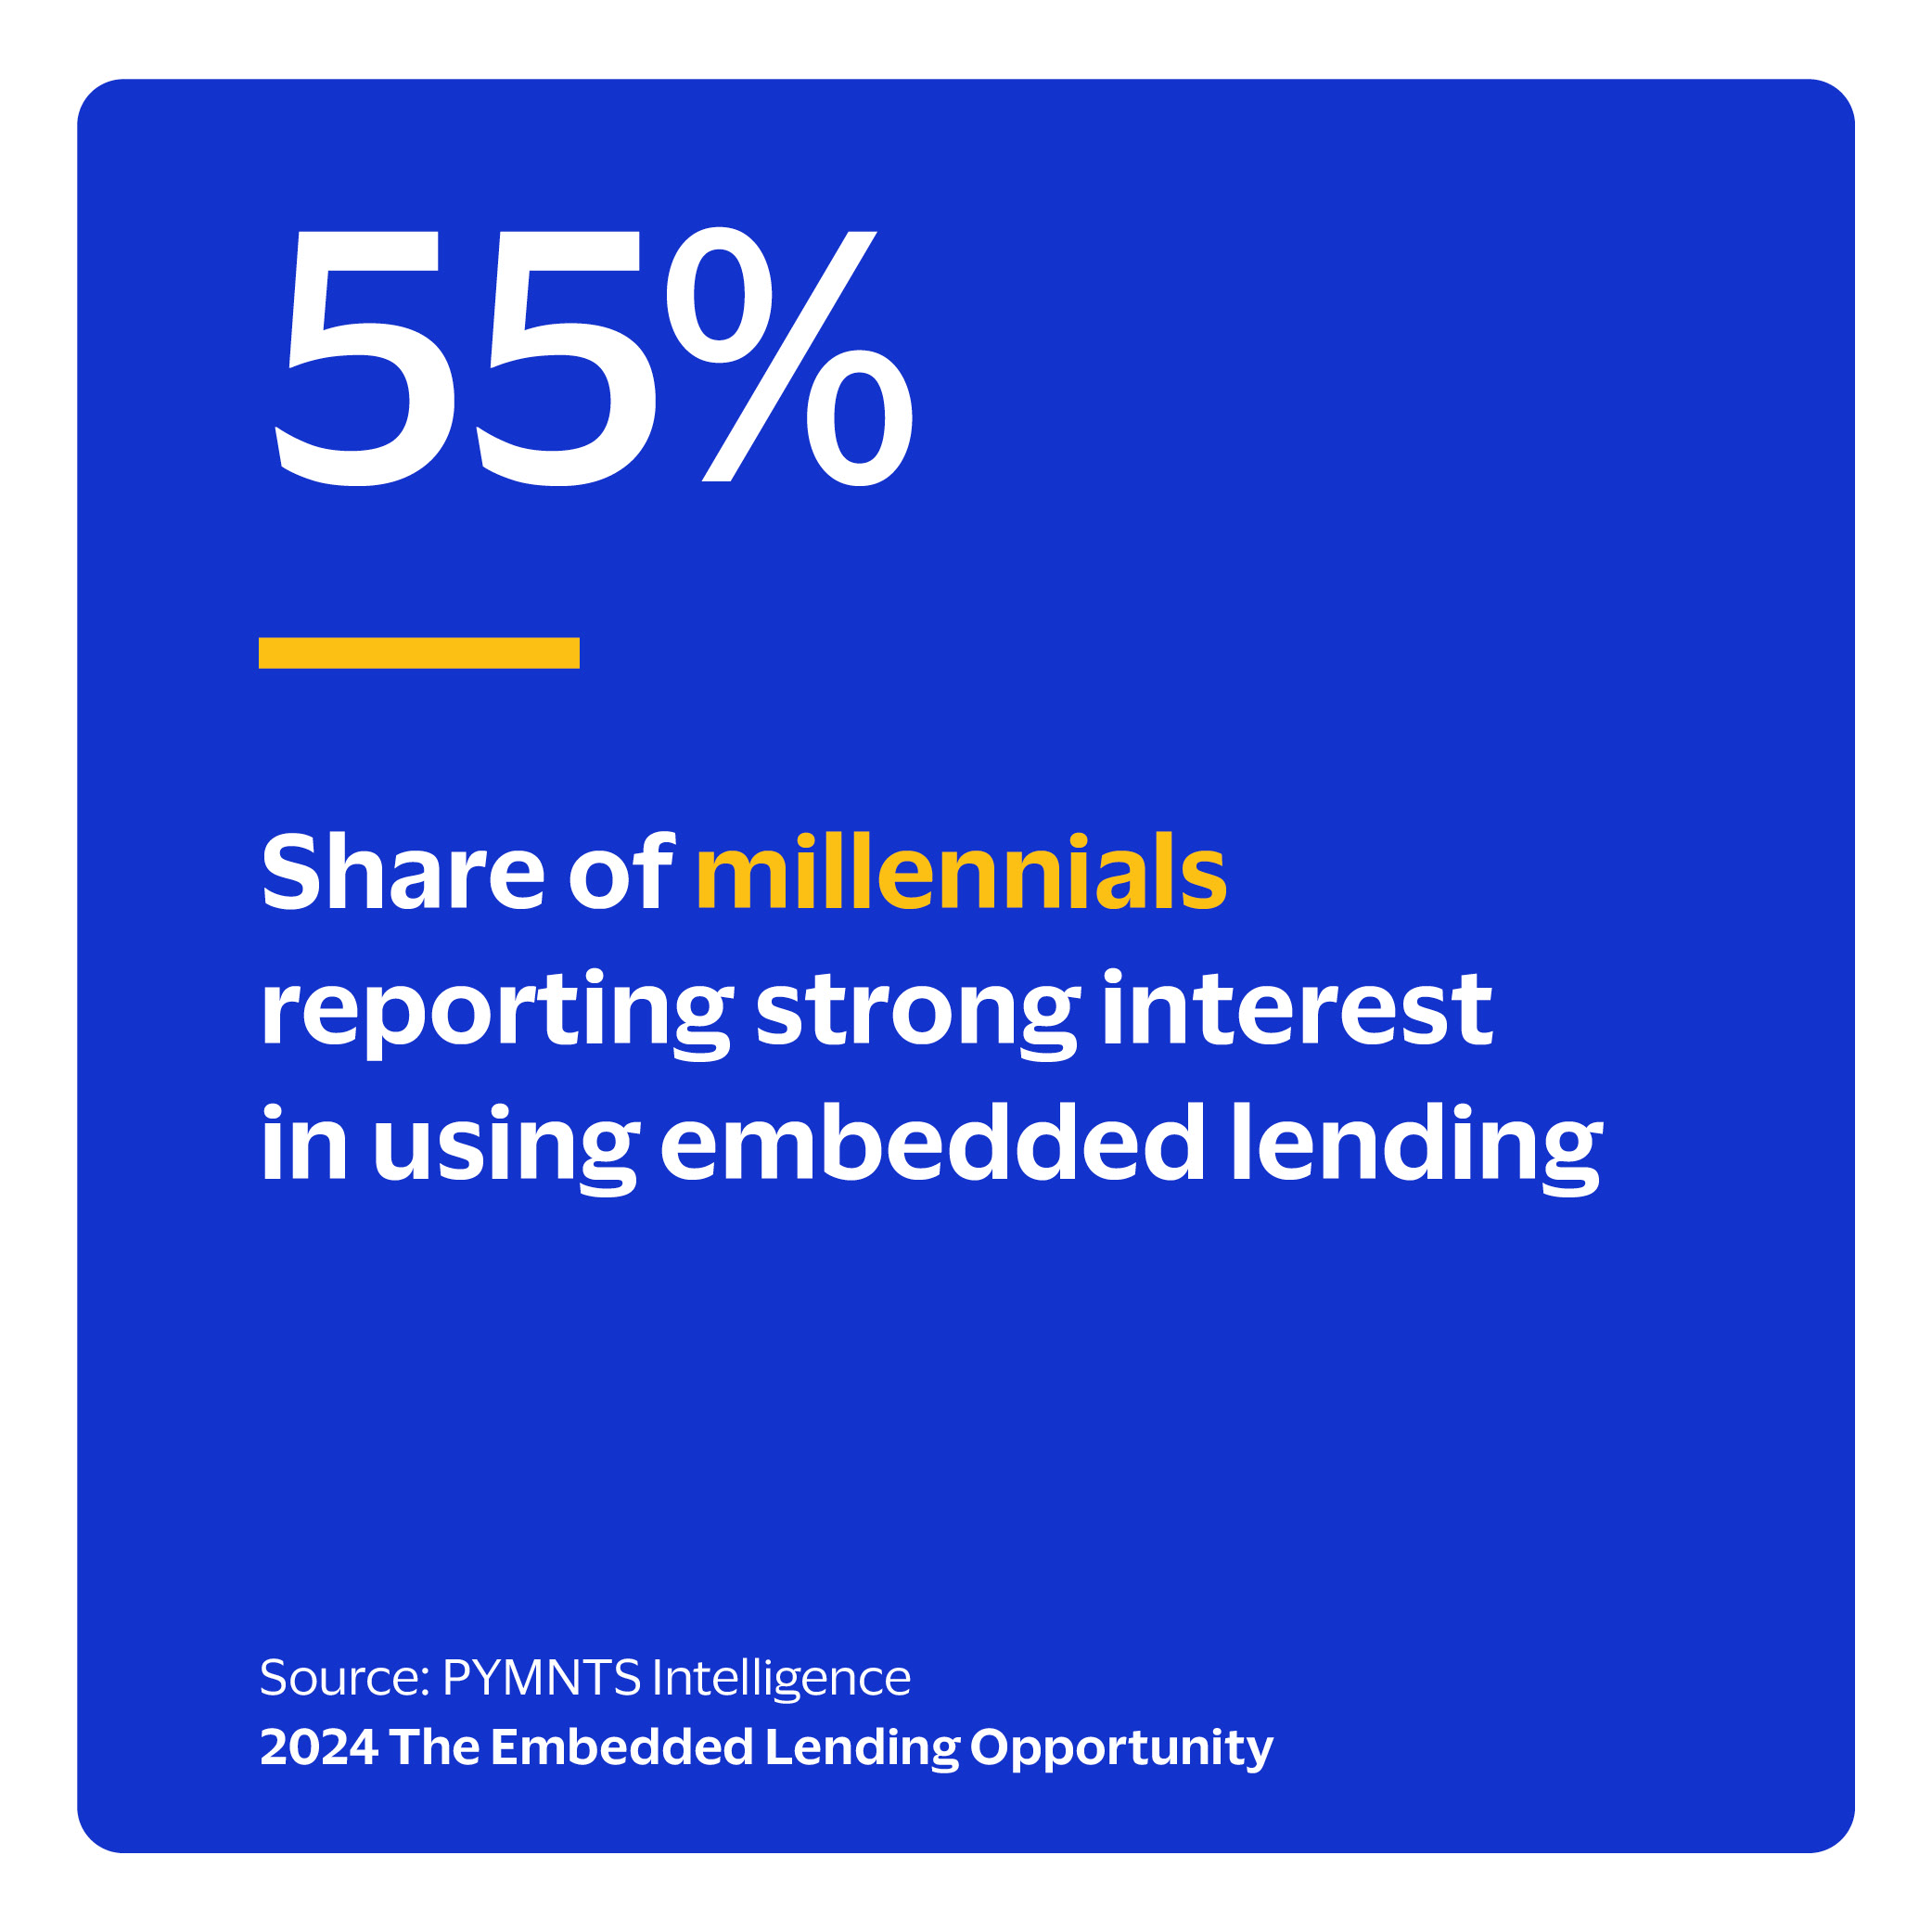 55%: Share of millennials reporting strong interest in using embedded lending